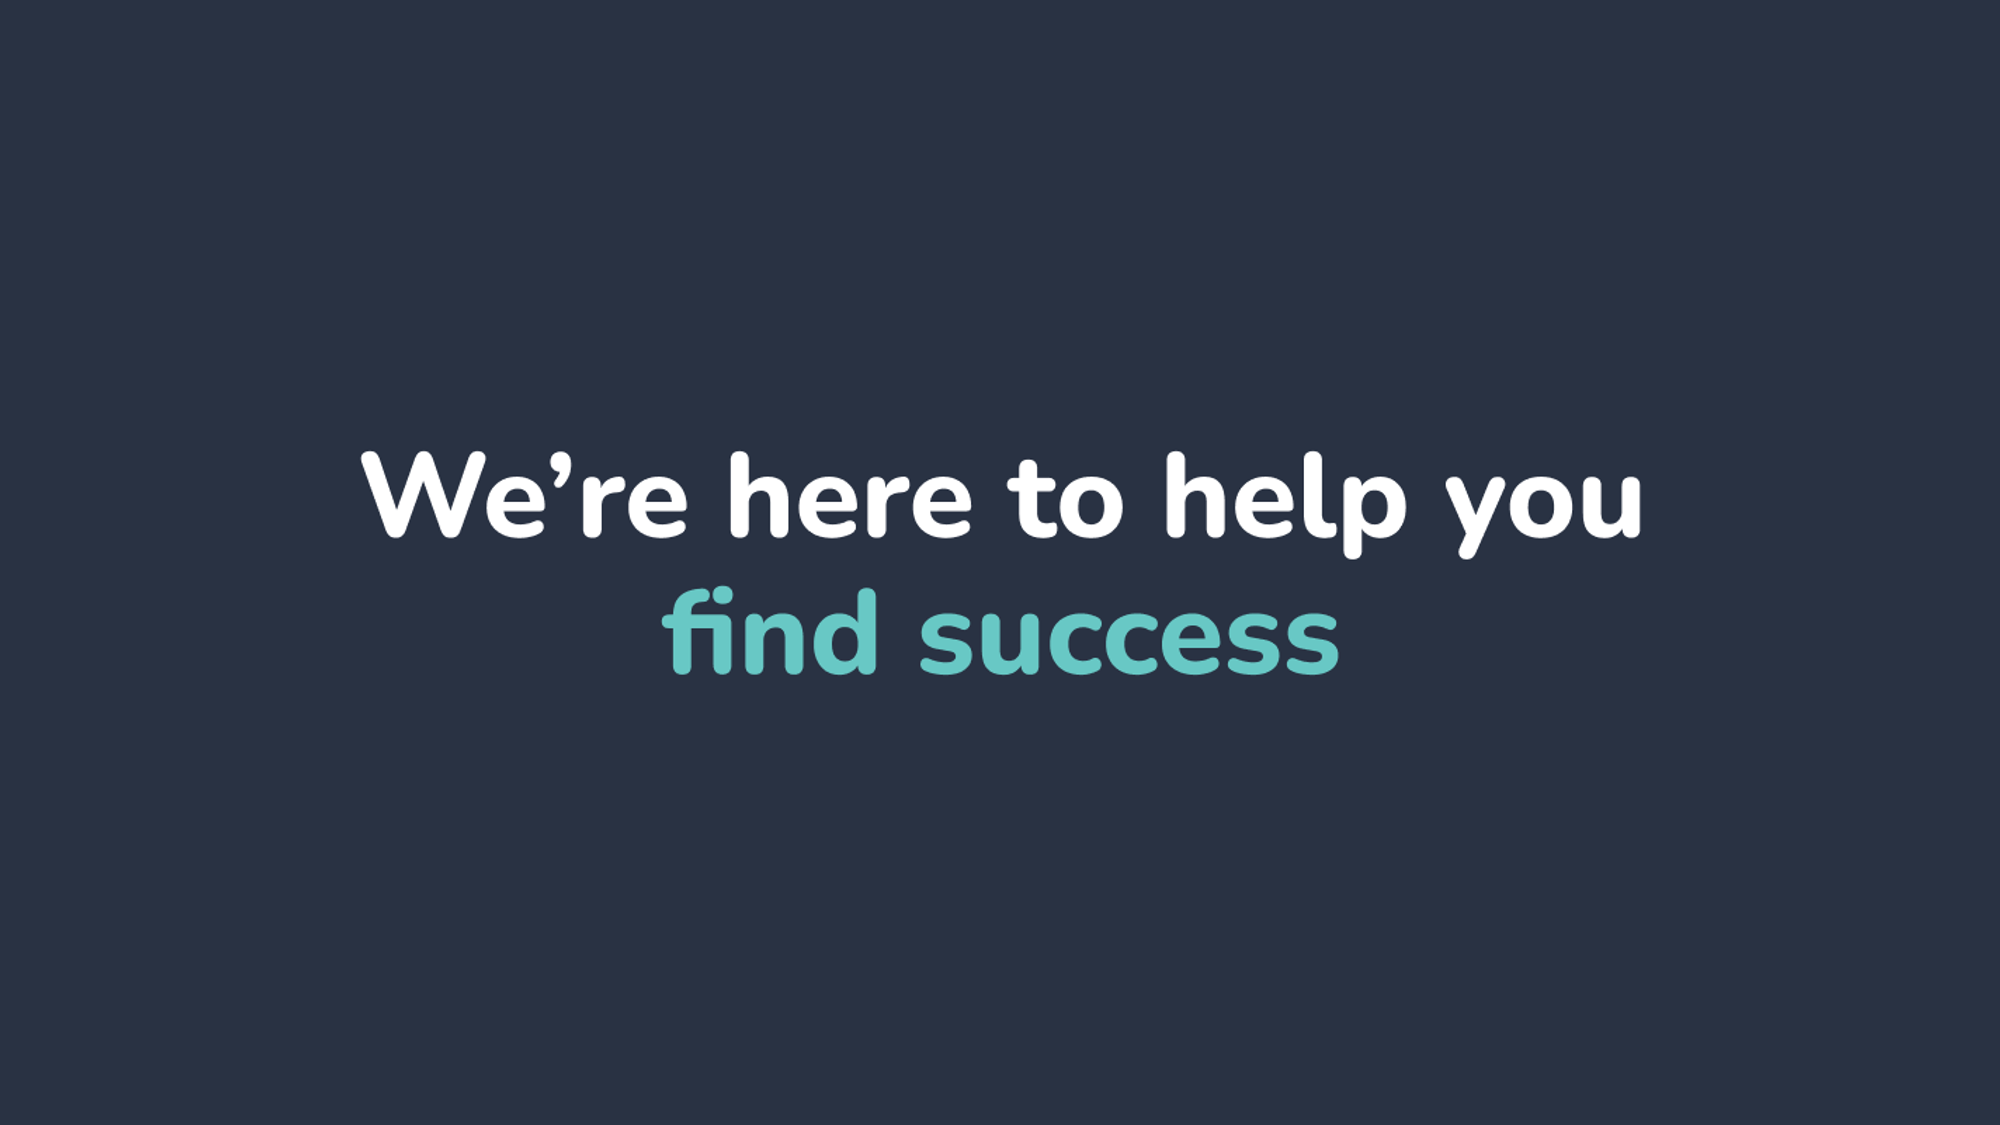 Watch: We are here to help you find success